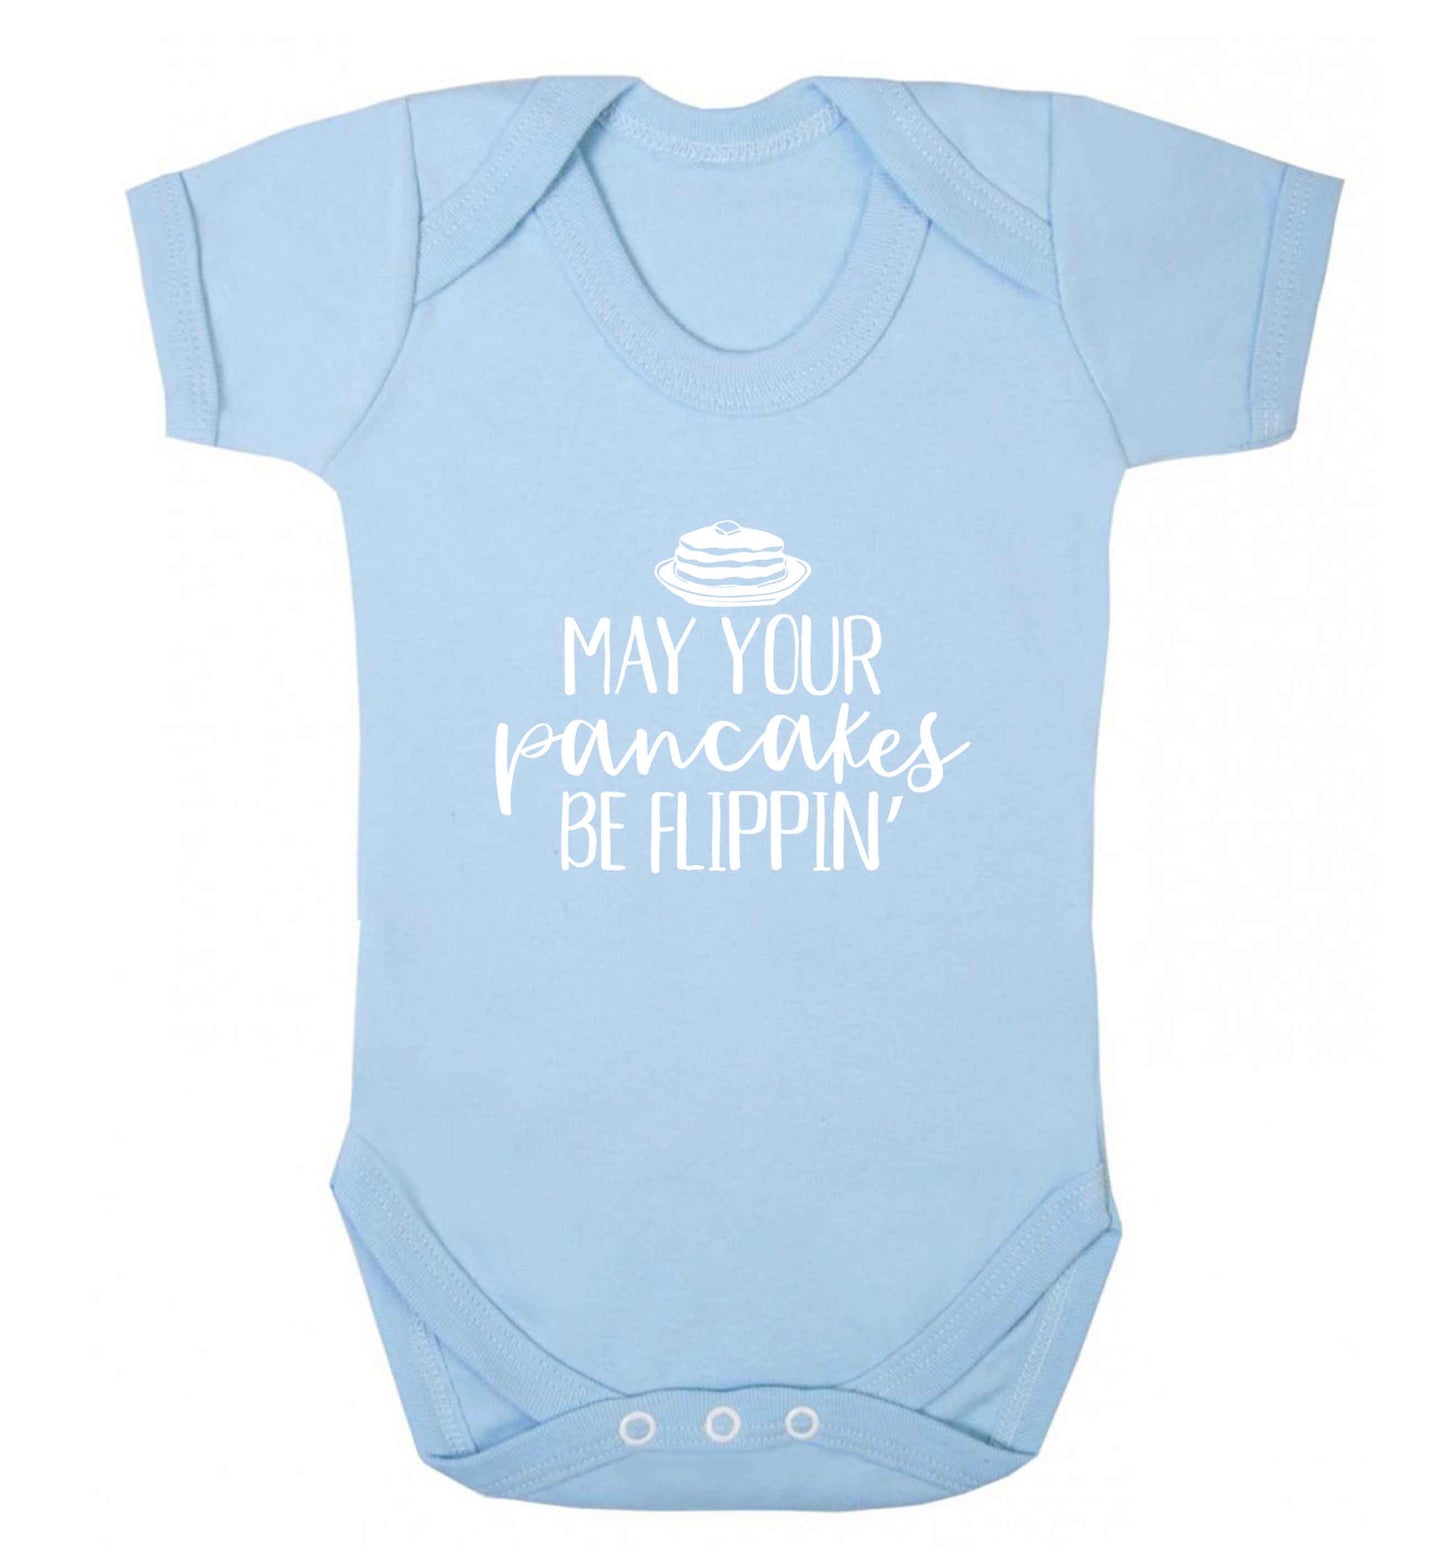 May your pancakes be flippin' baby vest pale blue 18-24 months